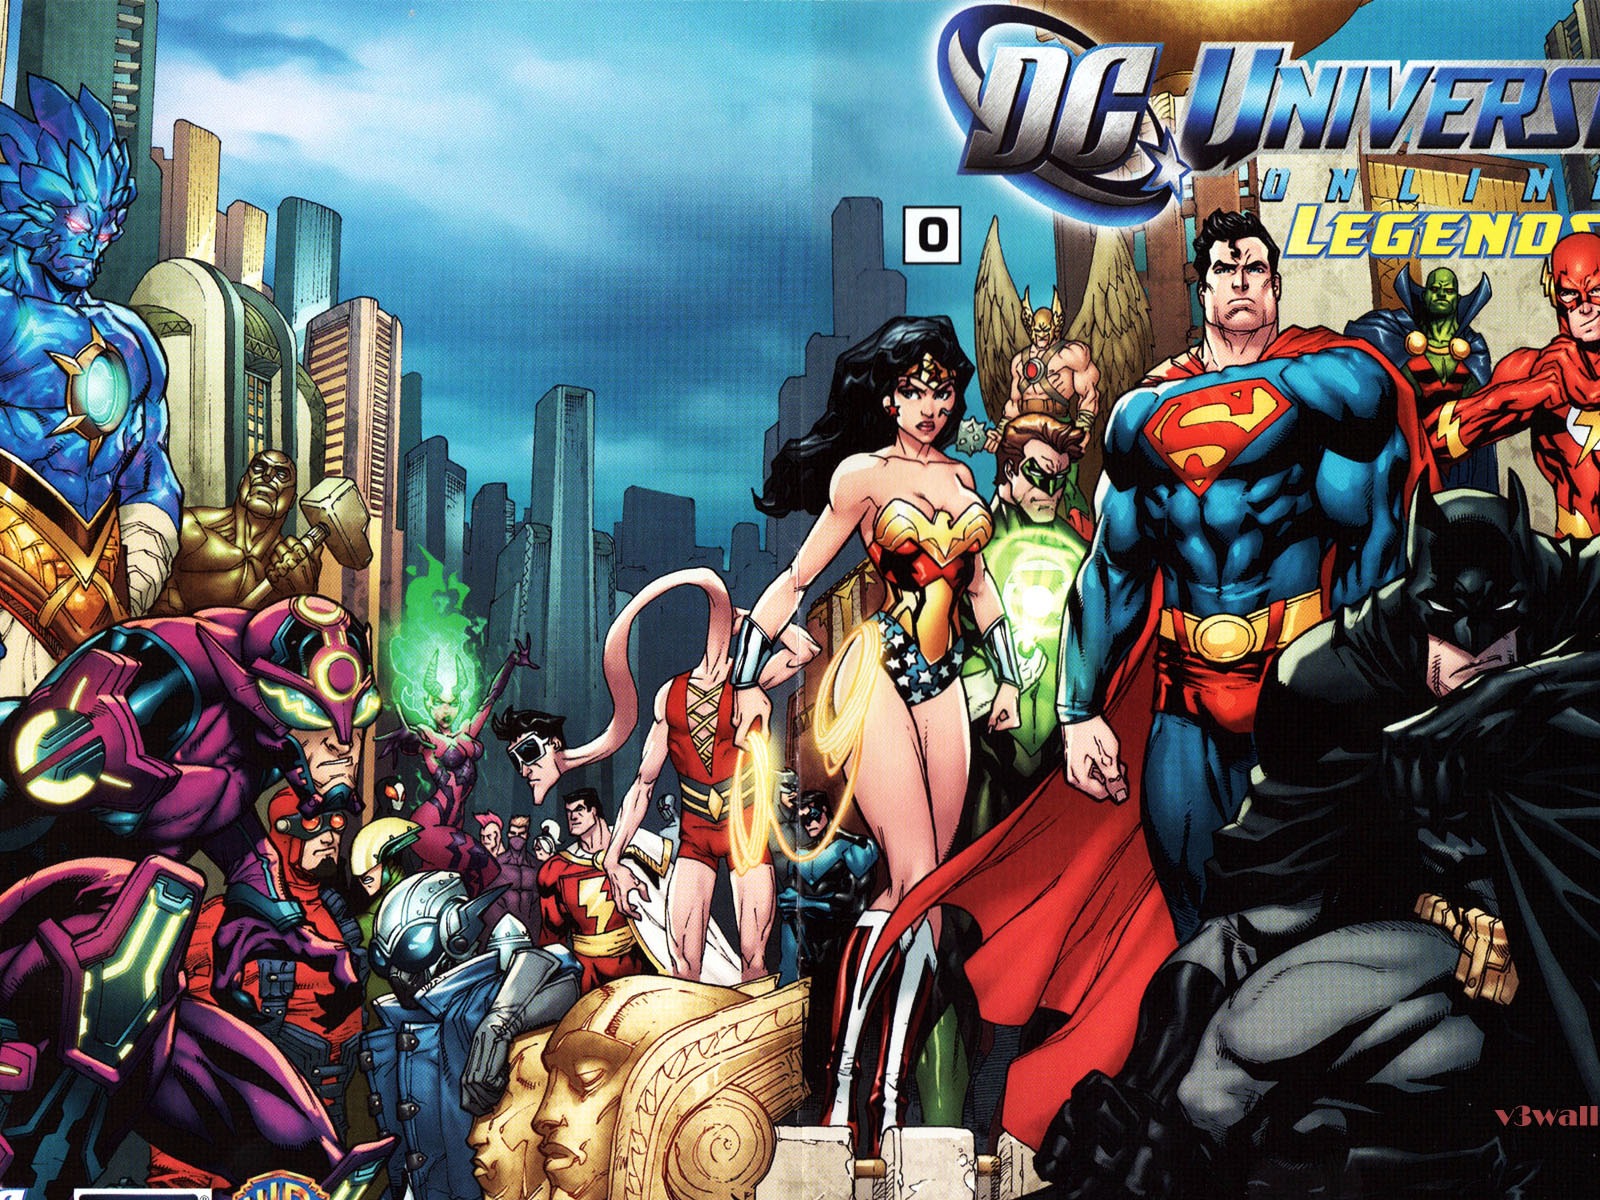 DC Universe Online HD game wallpapers #24 - 1600x1200